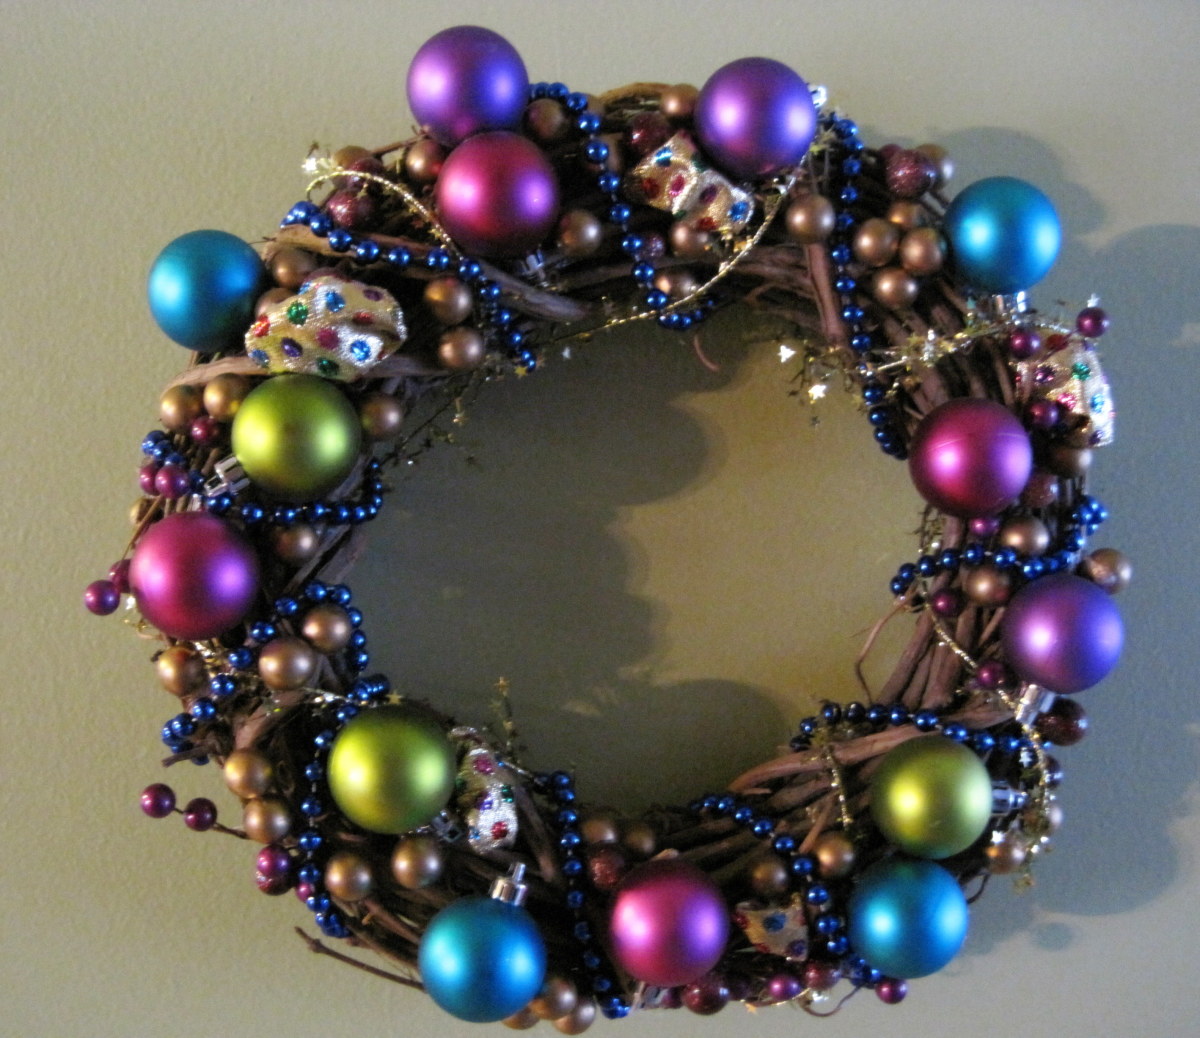 Clown Wreath -  crafted with vine wreath, gold ball pics, polka-dot fabric, blue bead necklace, gold tinsel wire, and Christmas ornaments. 